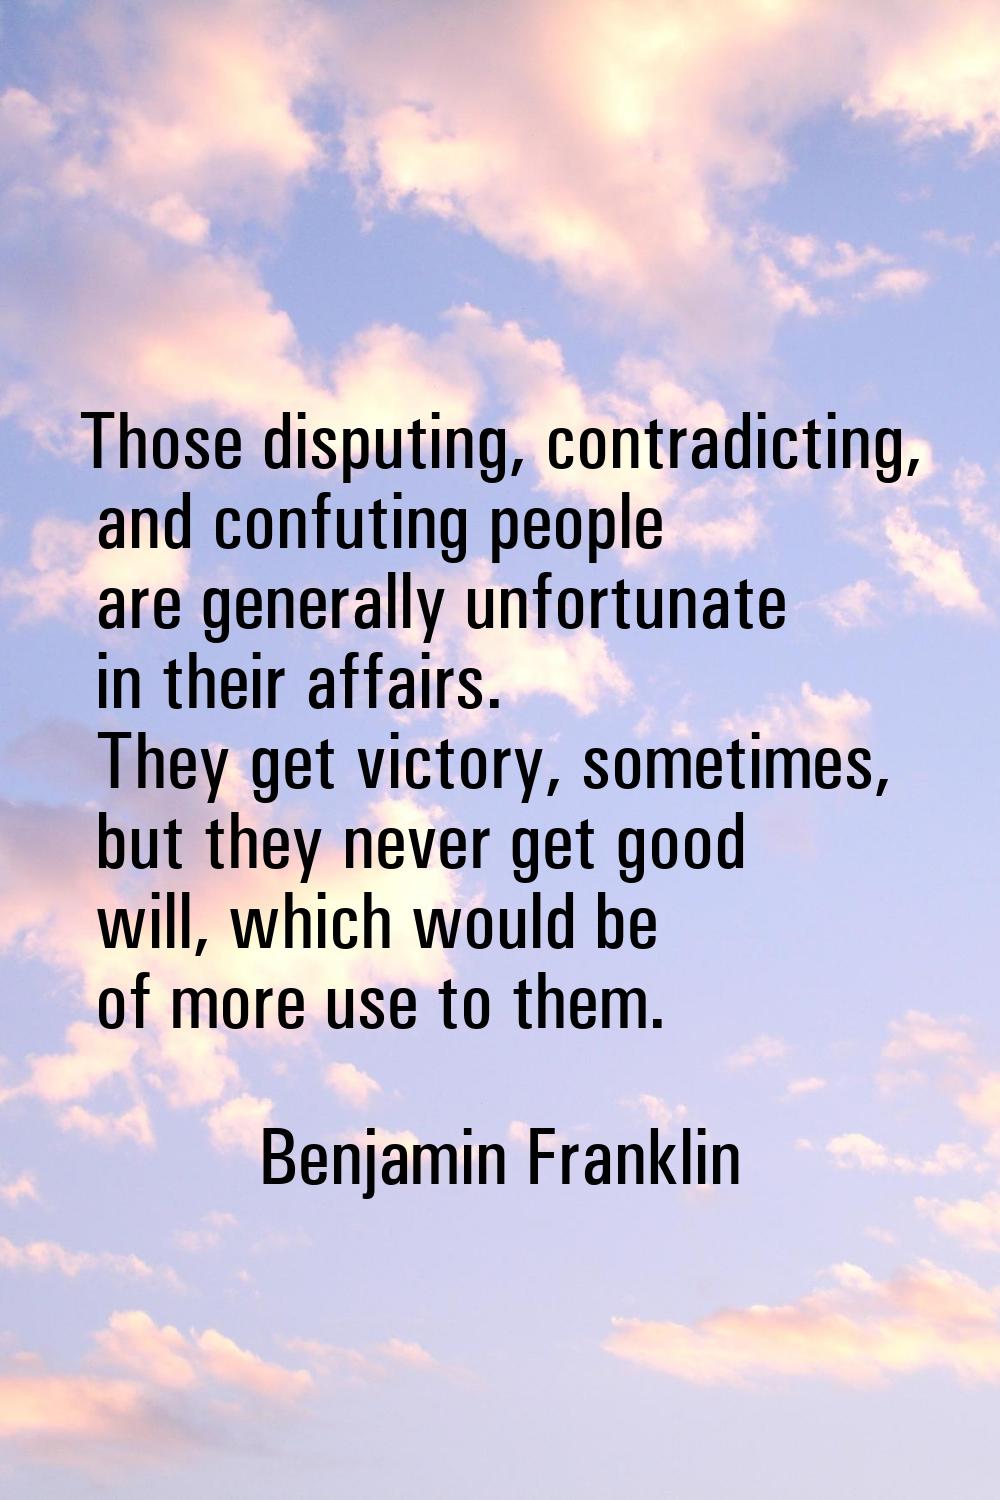 Those disputing, contradicting, and confuting people are generally unfortunate in their affairs. Th